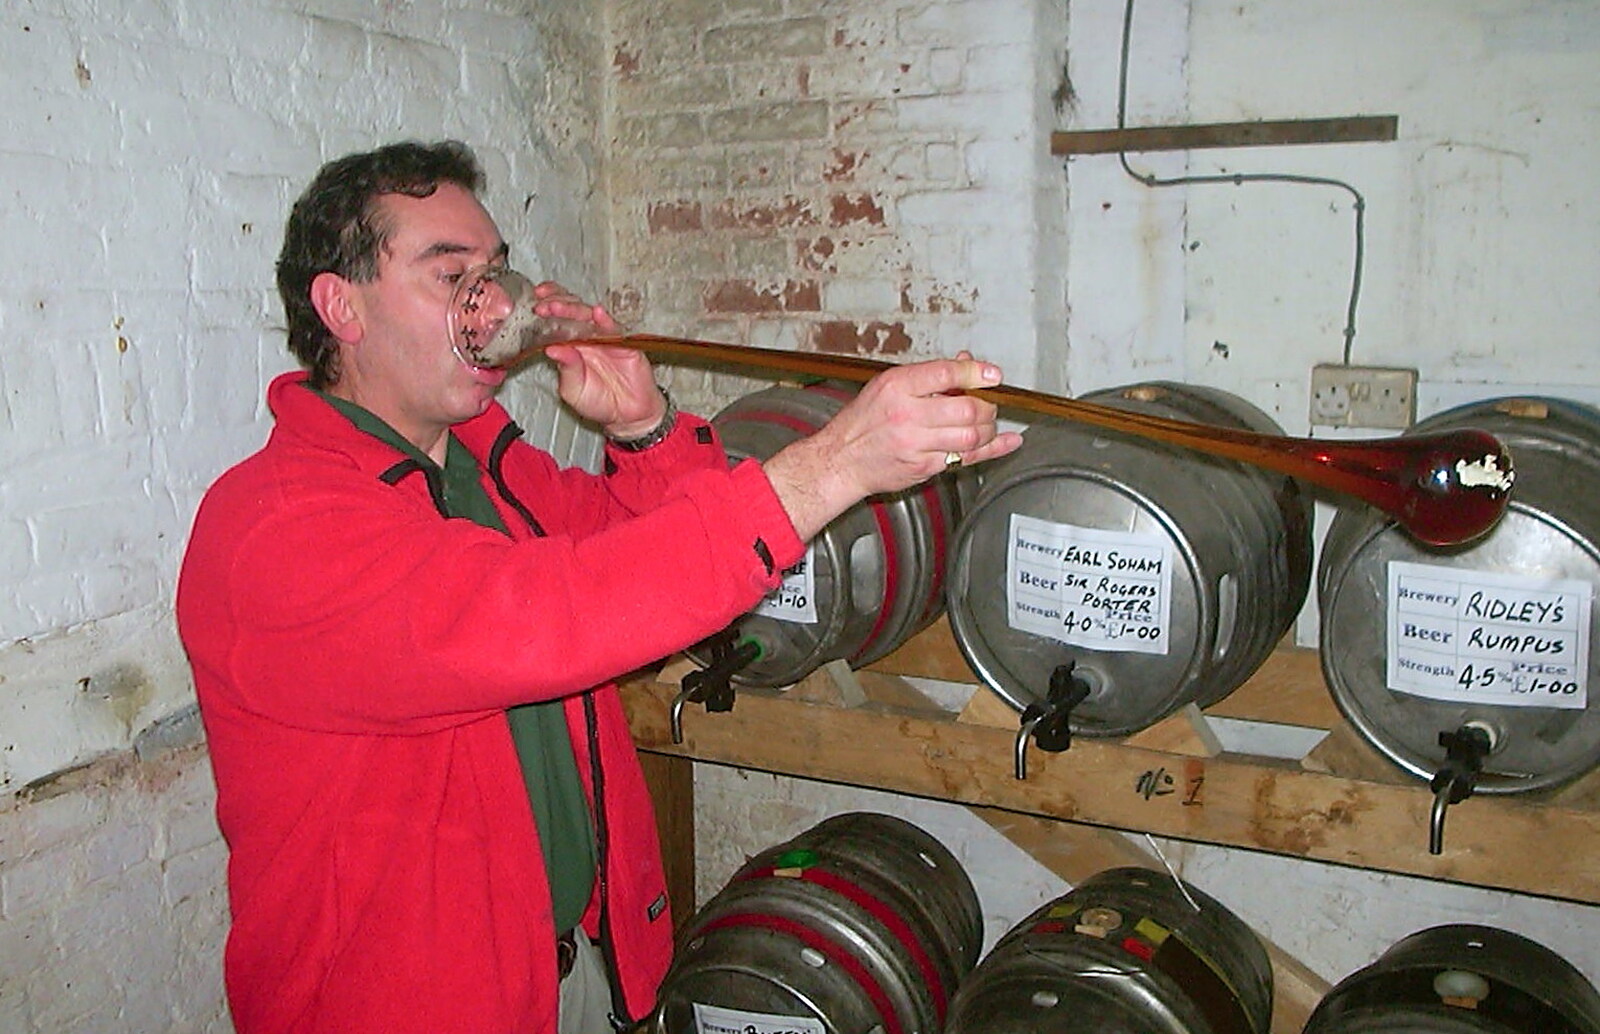 The yard of ale is started from The Hoxne Beer Festival, Suffolk - 20th May 2002